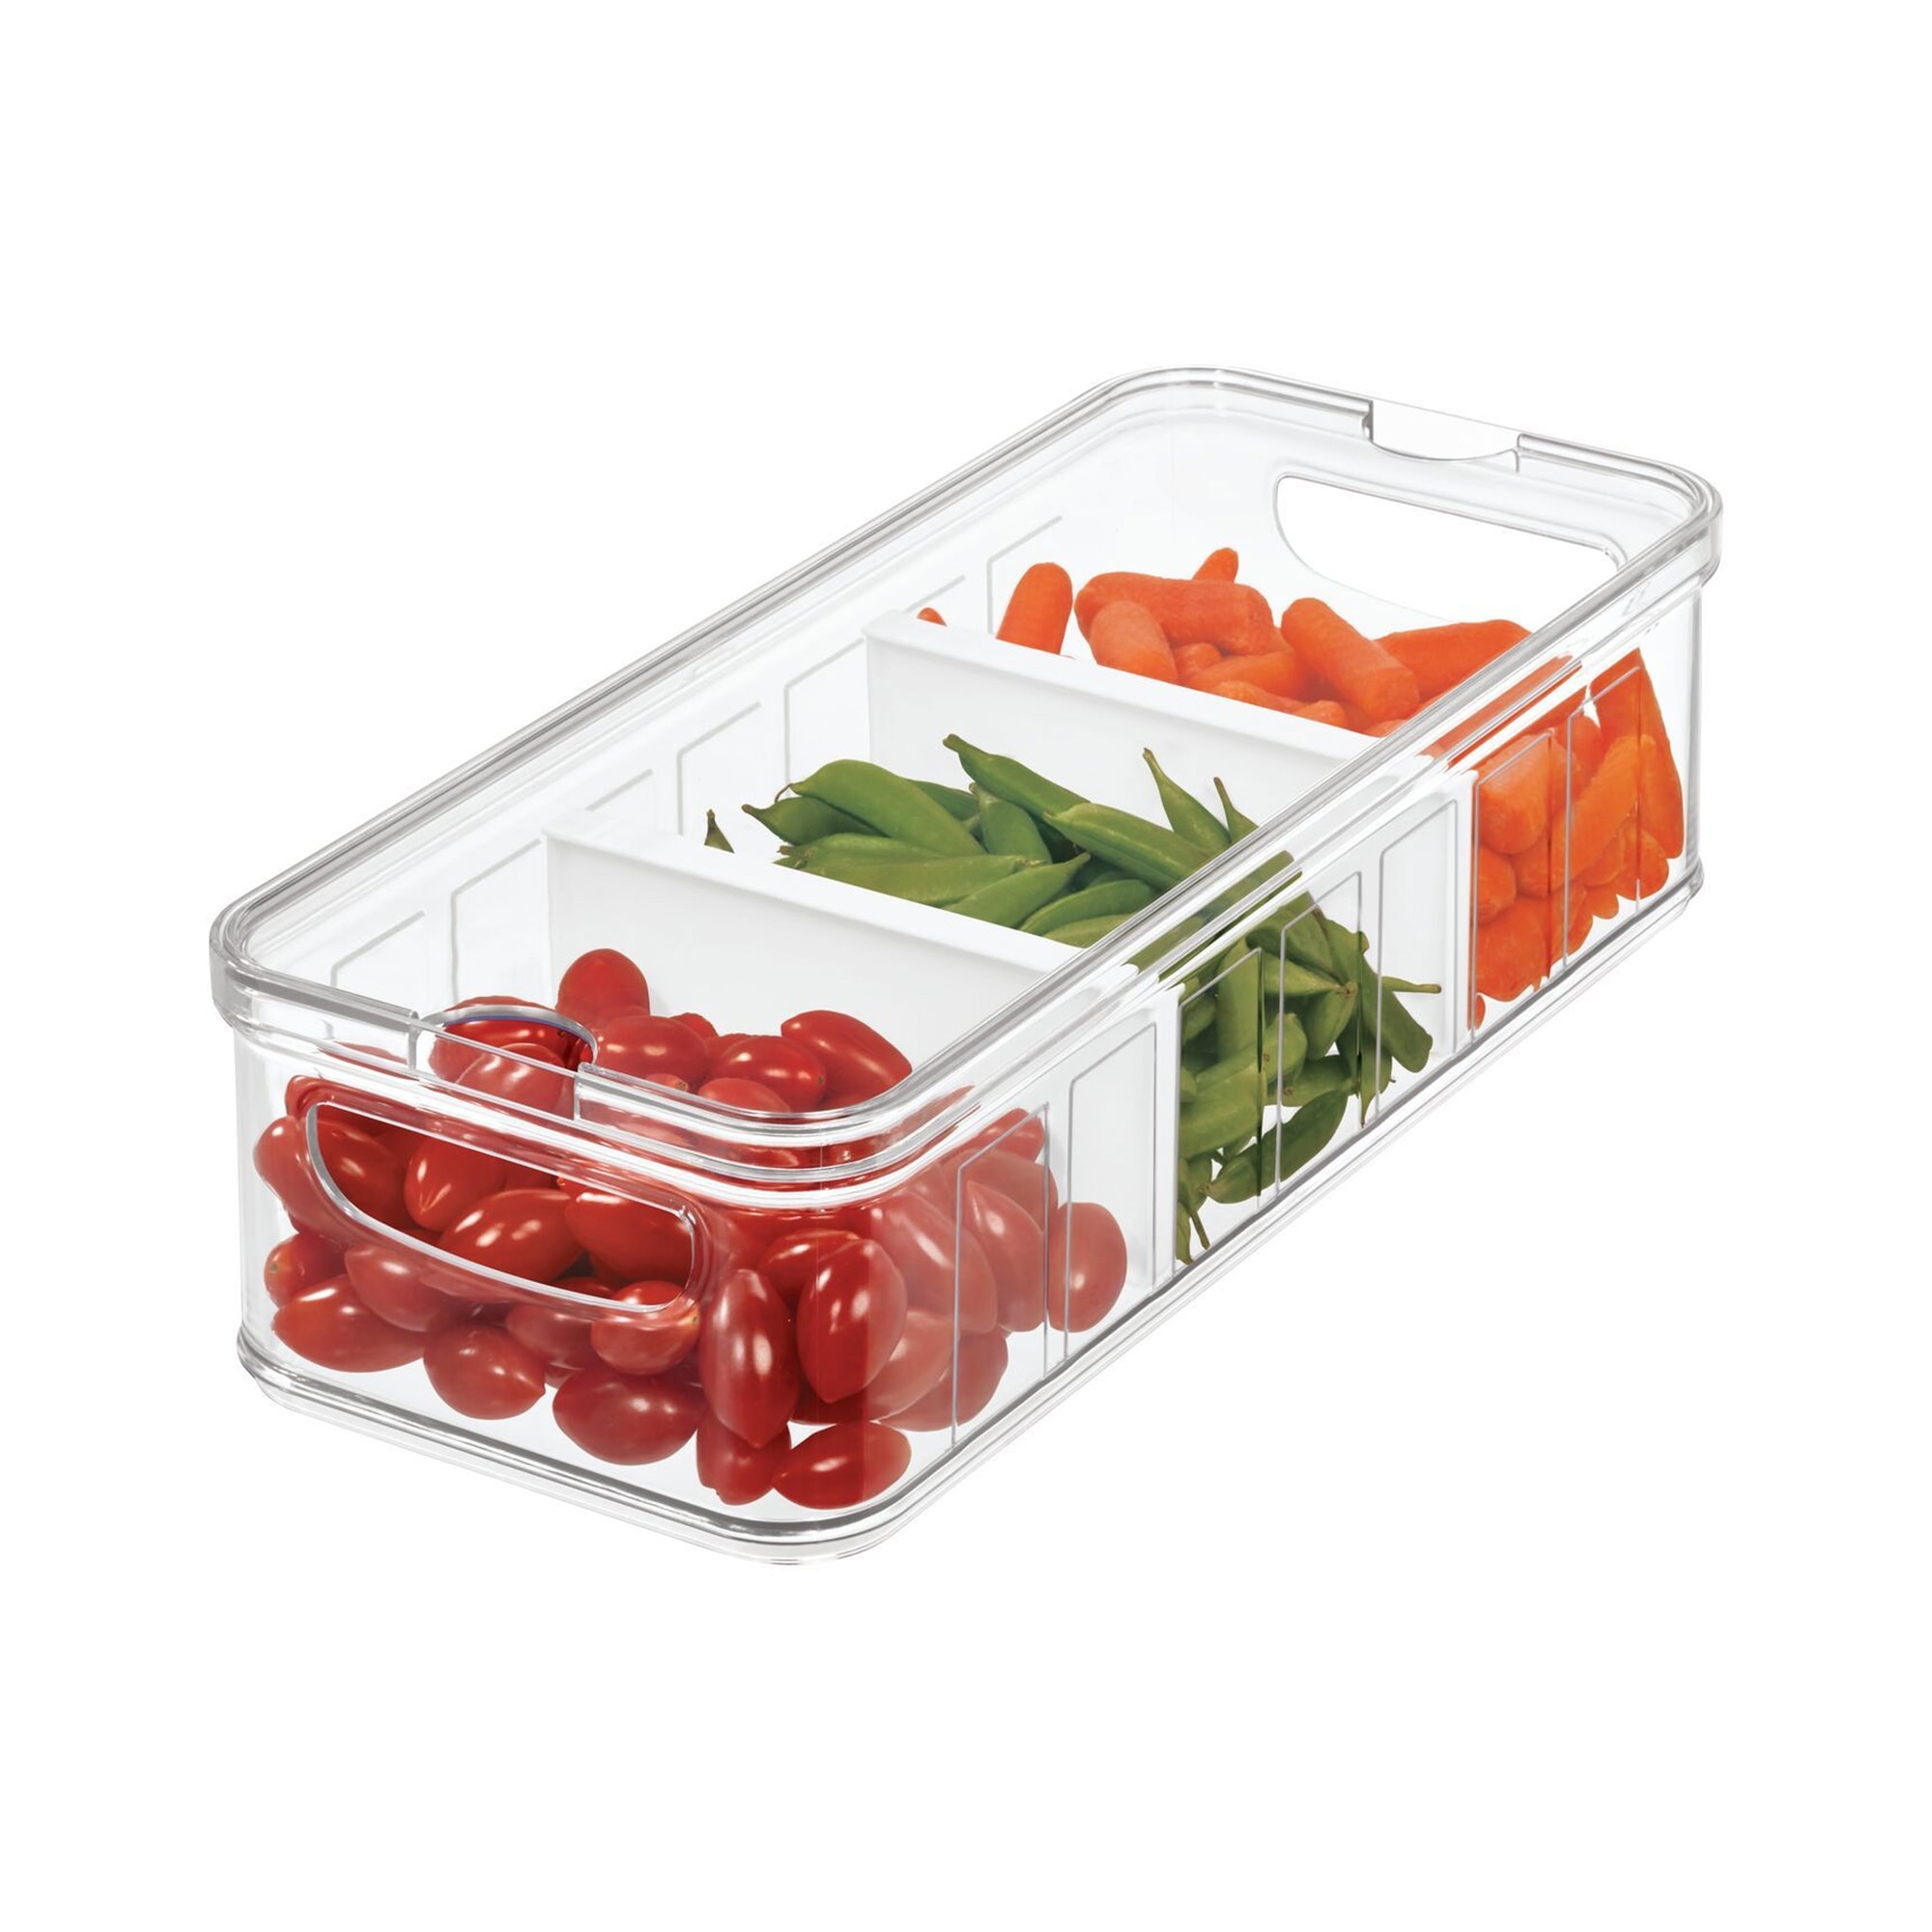 iDesign Crisp Large Bin with Dividers Clear Image 1